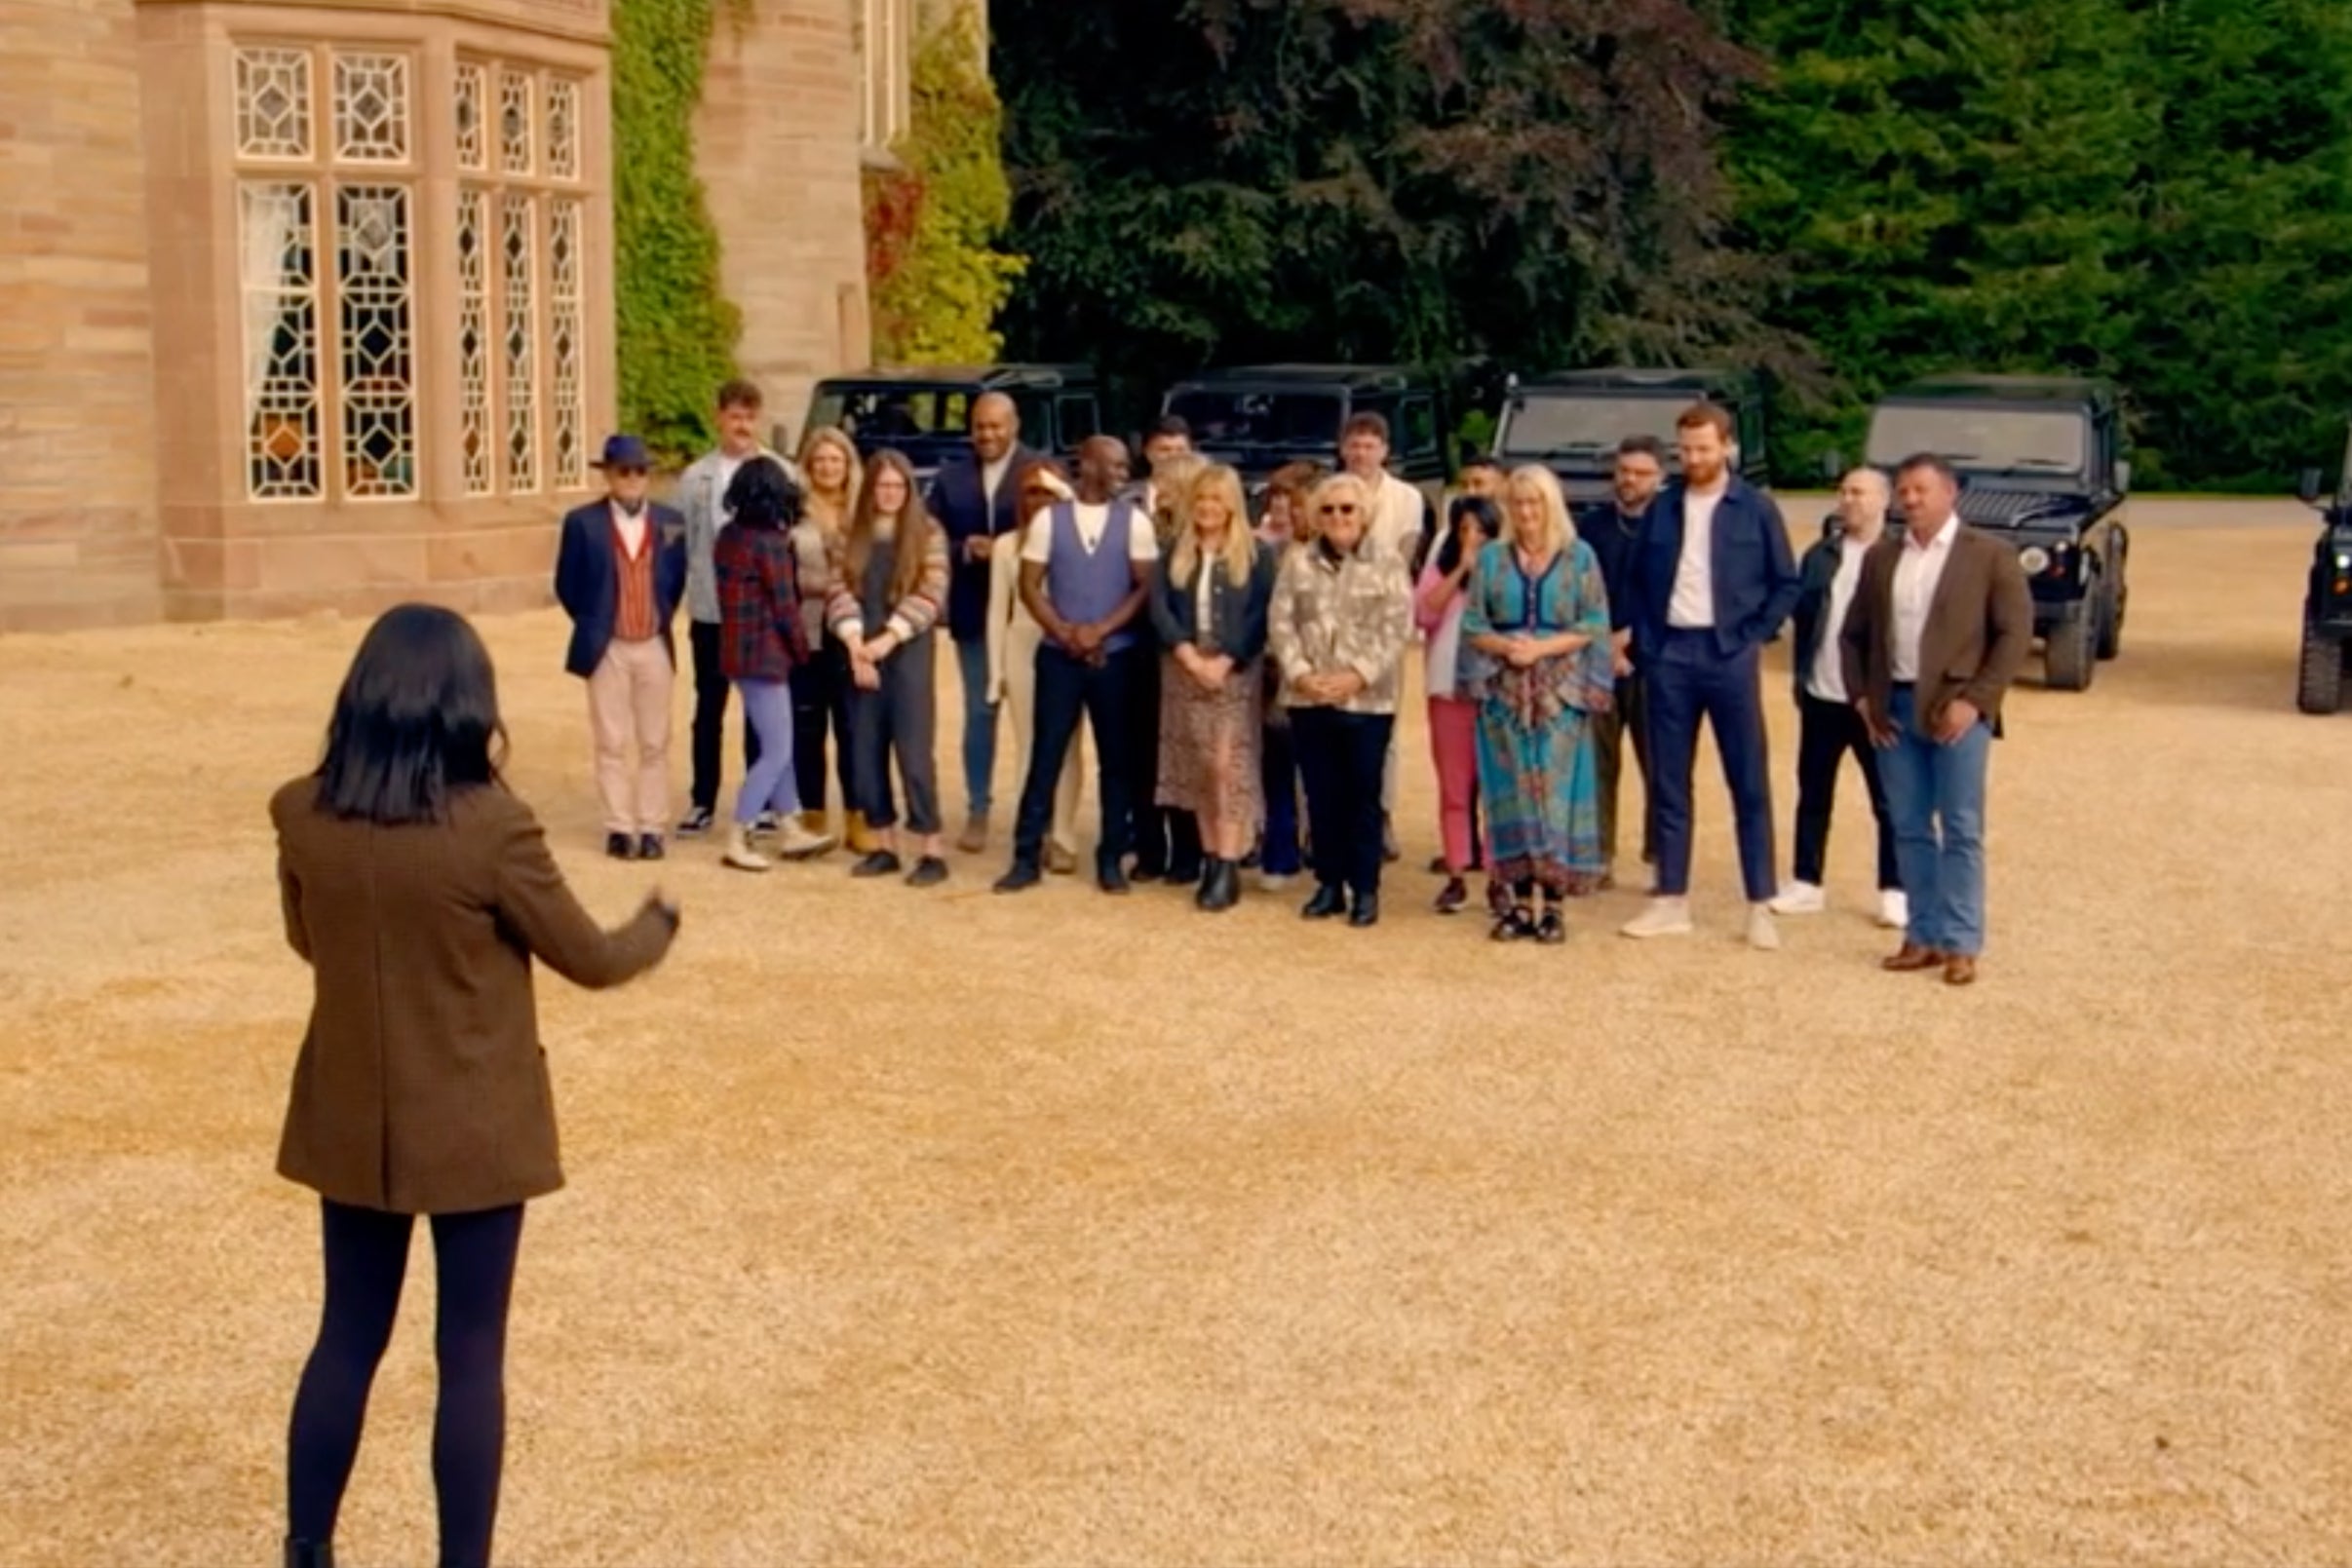 Claudia Winkleman confronting ‘The Traitors’ contestants